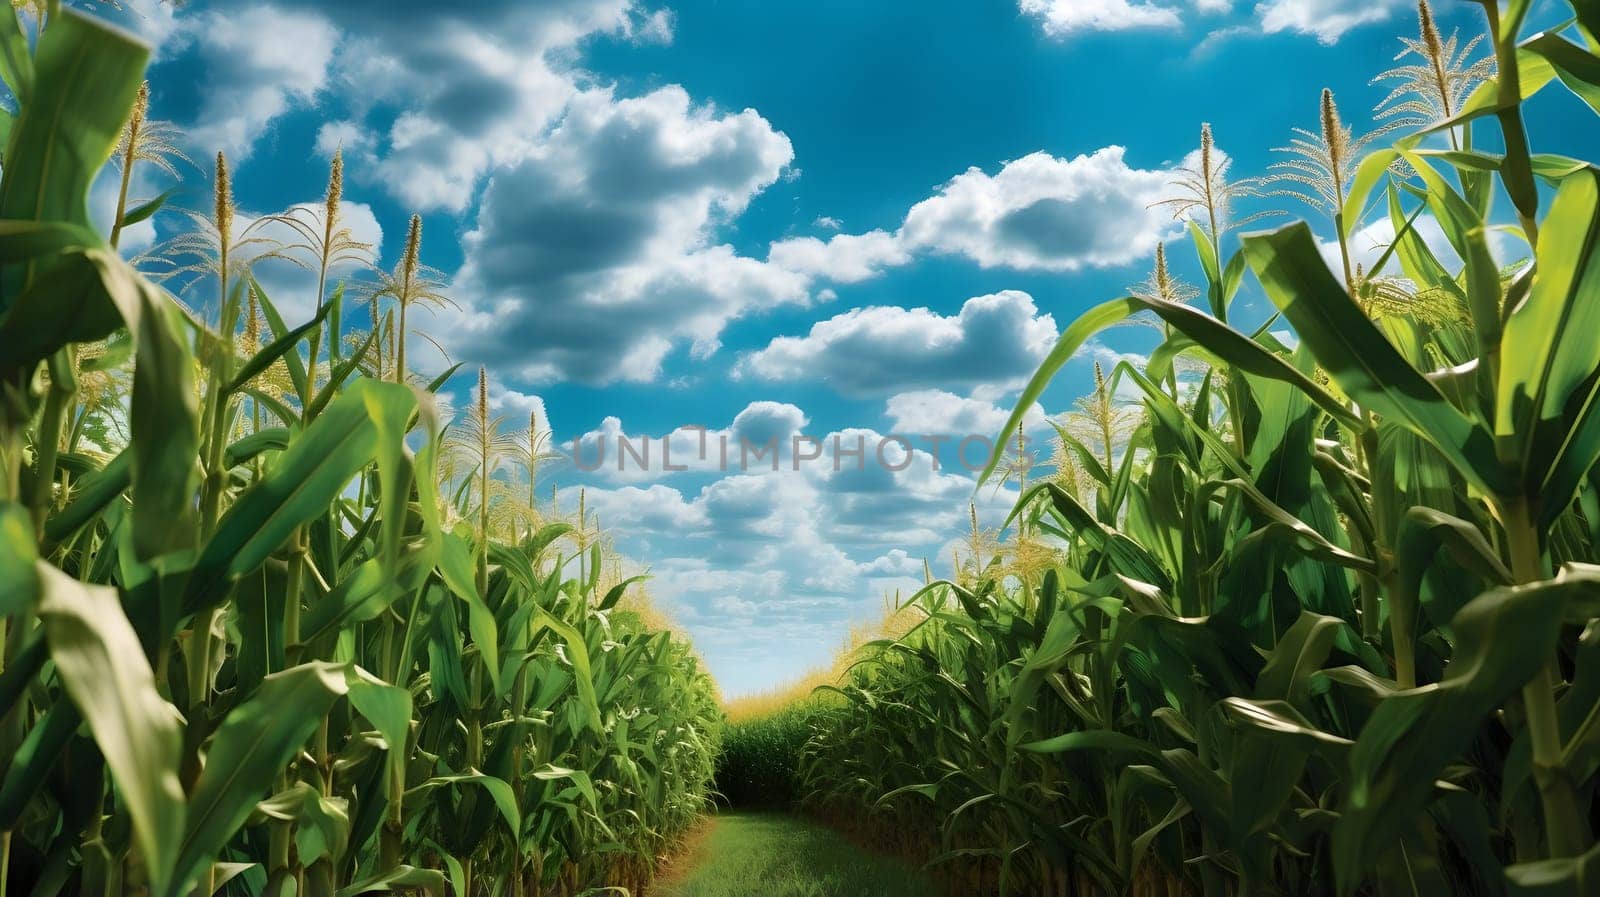 Path in the middle, field, of corn. Corn as a dish of thanksgiving for the harvest. An atmosphere of joy and celebration.